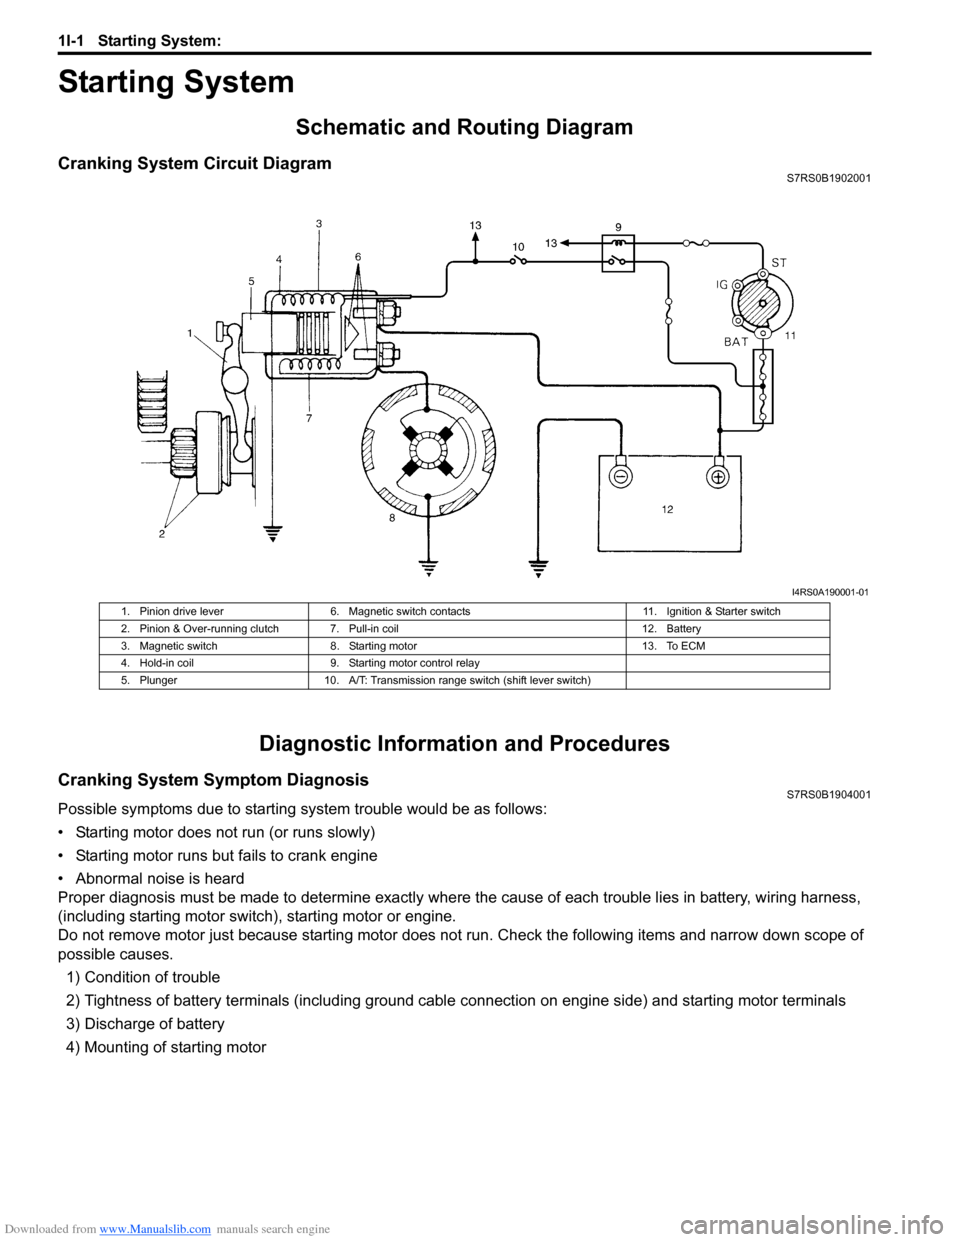 SUZUKI SWIFT 2008 2.G Service Workshop Manual Downloaded from www.Manualslib.com manuals search engine 1I-1 Starting System: 
Engine
Starting System
Schematic and Routing Diagram
Cranking System Circuit DiagramS7RS0B1902001
Diagnostic Information